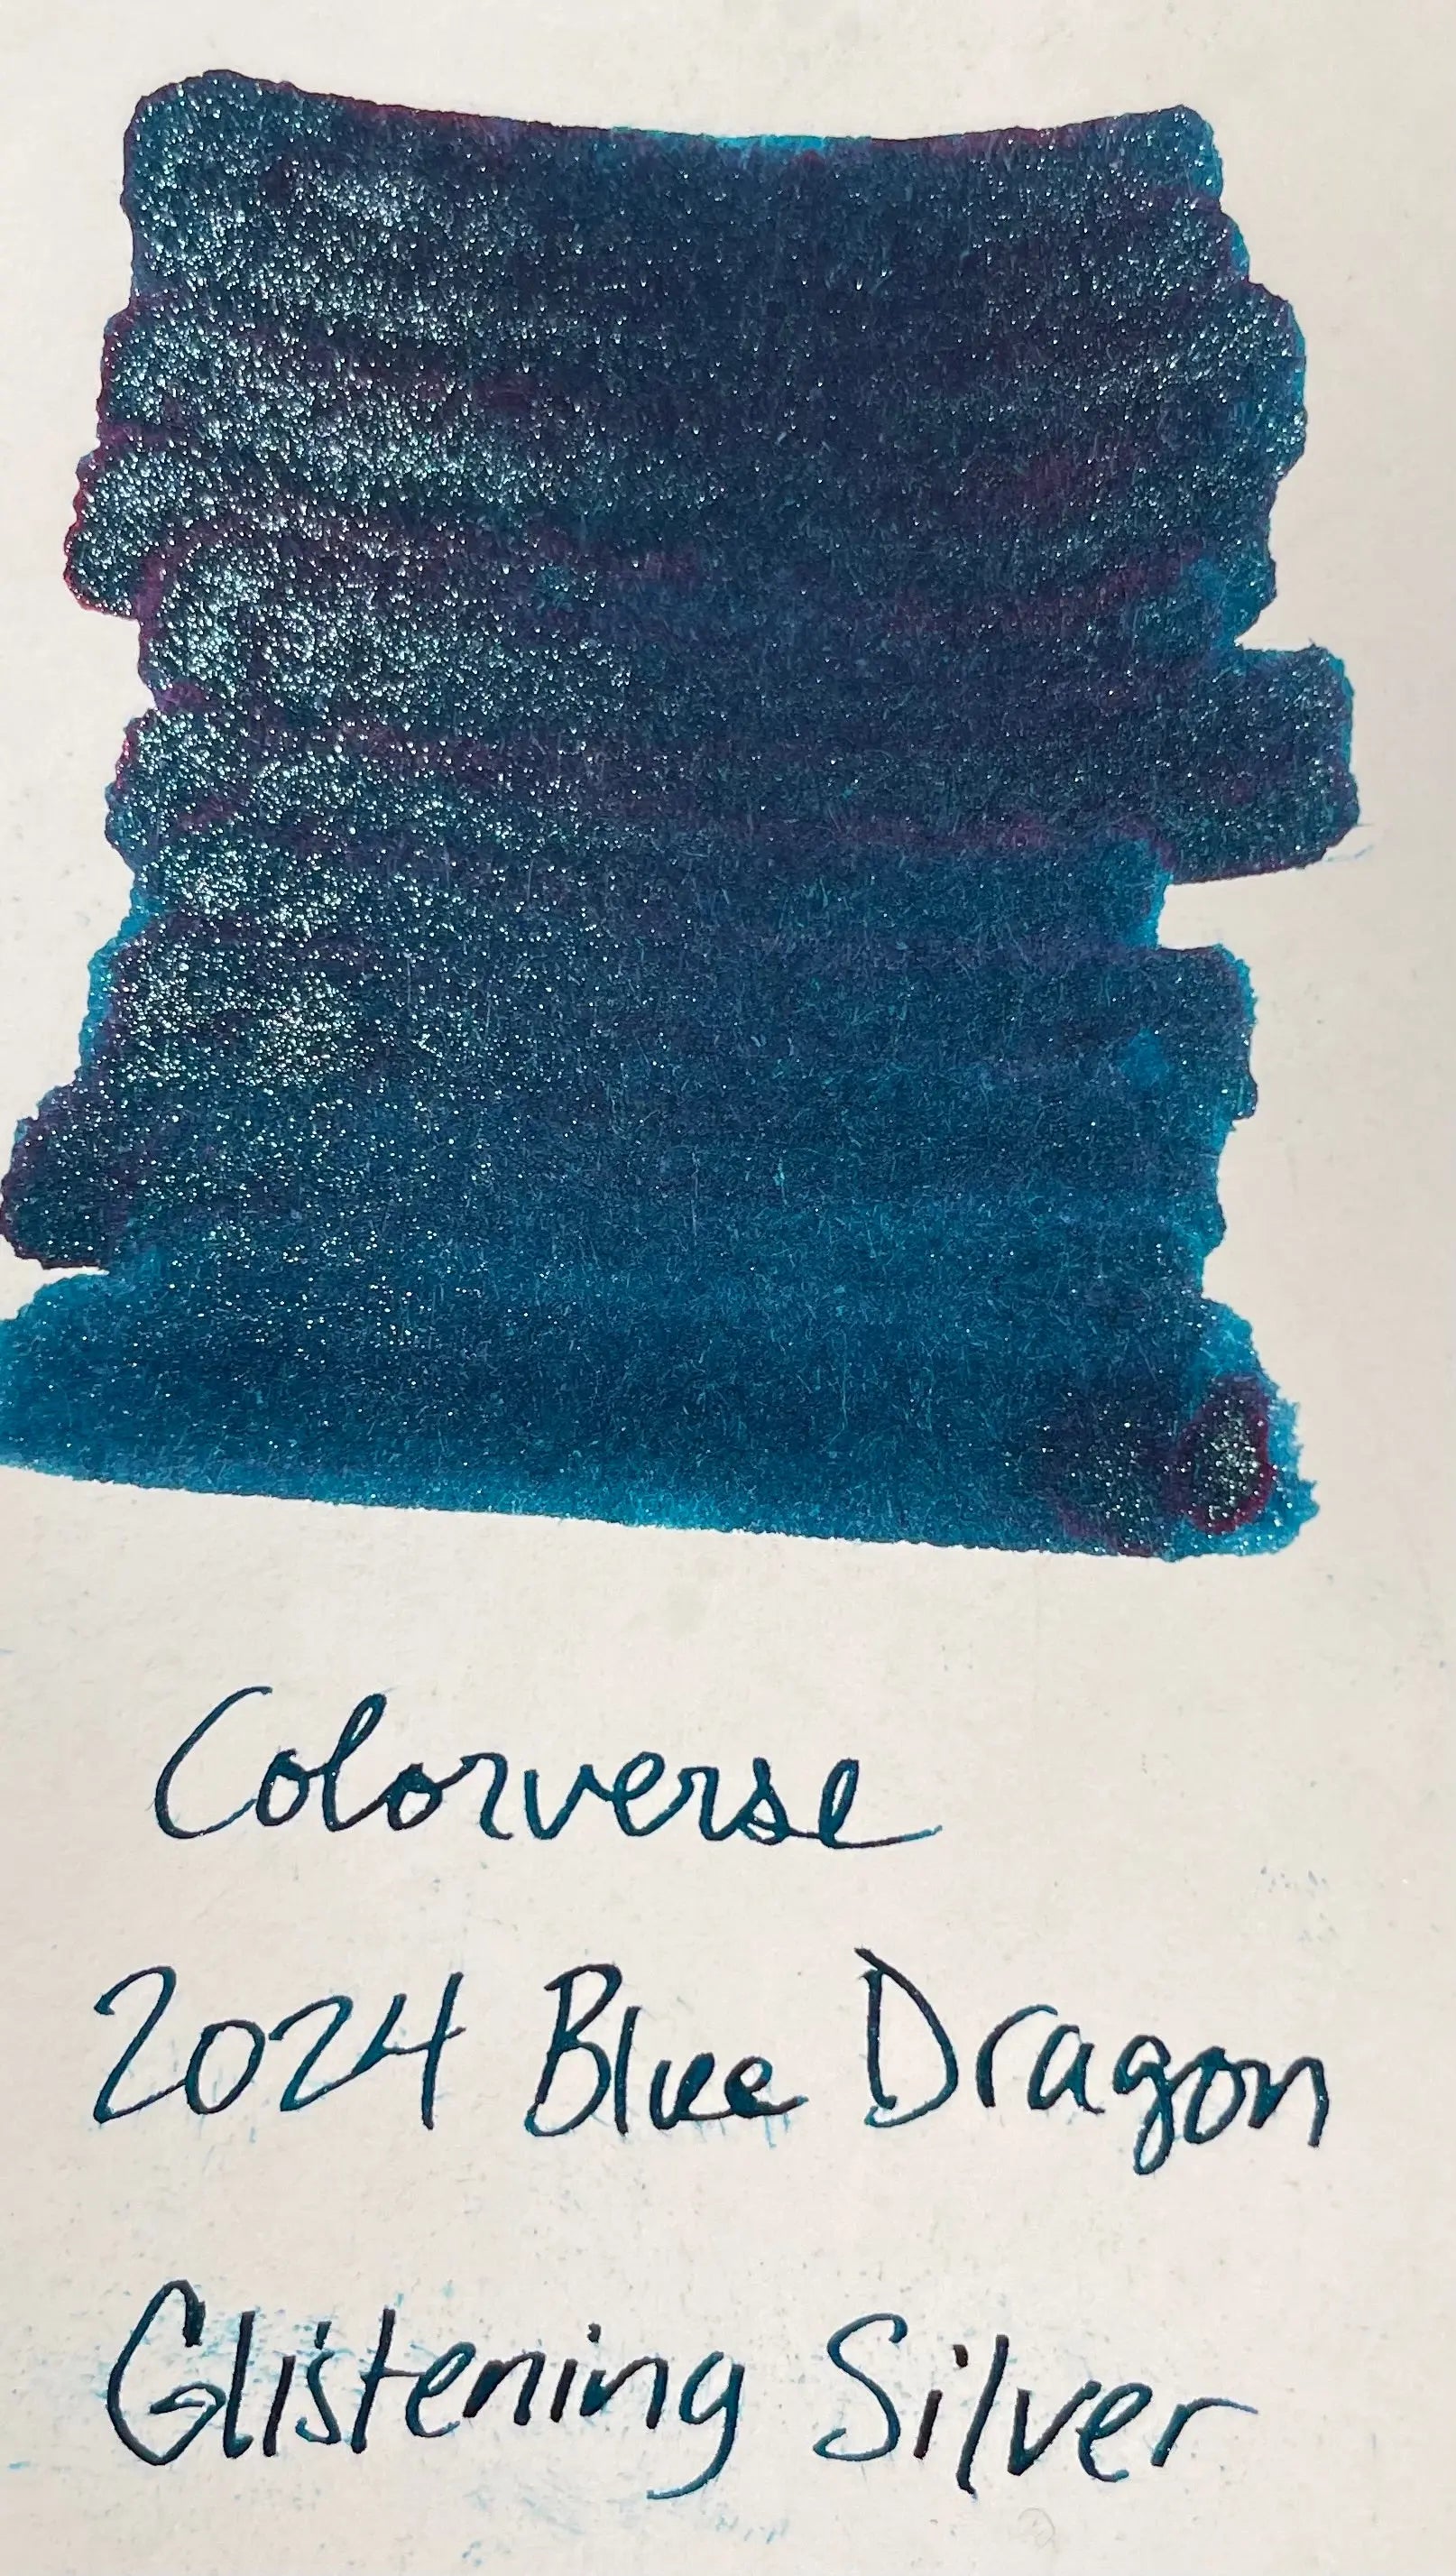 Colorverse Ink Bottle - 2024 Blue Dragon Special Series - Glistening Silver - 15ml Colorverse